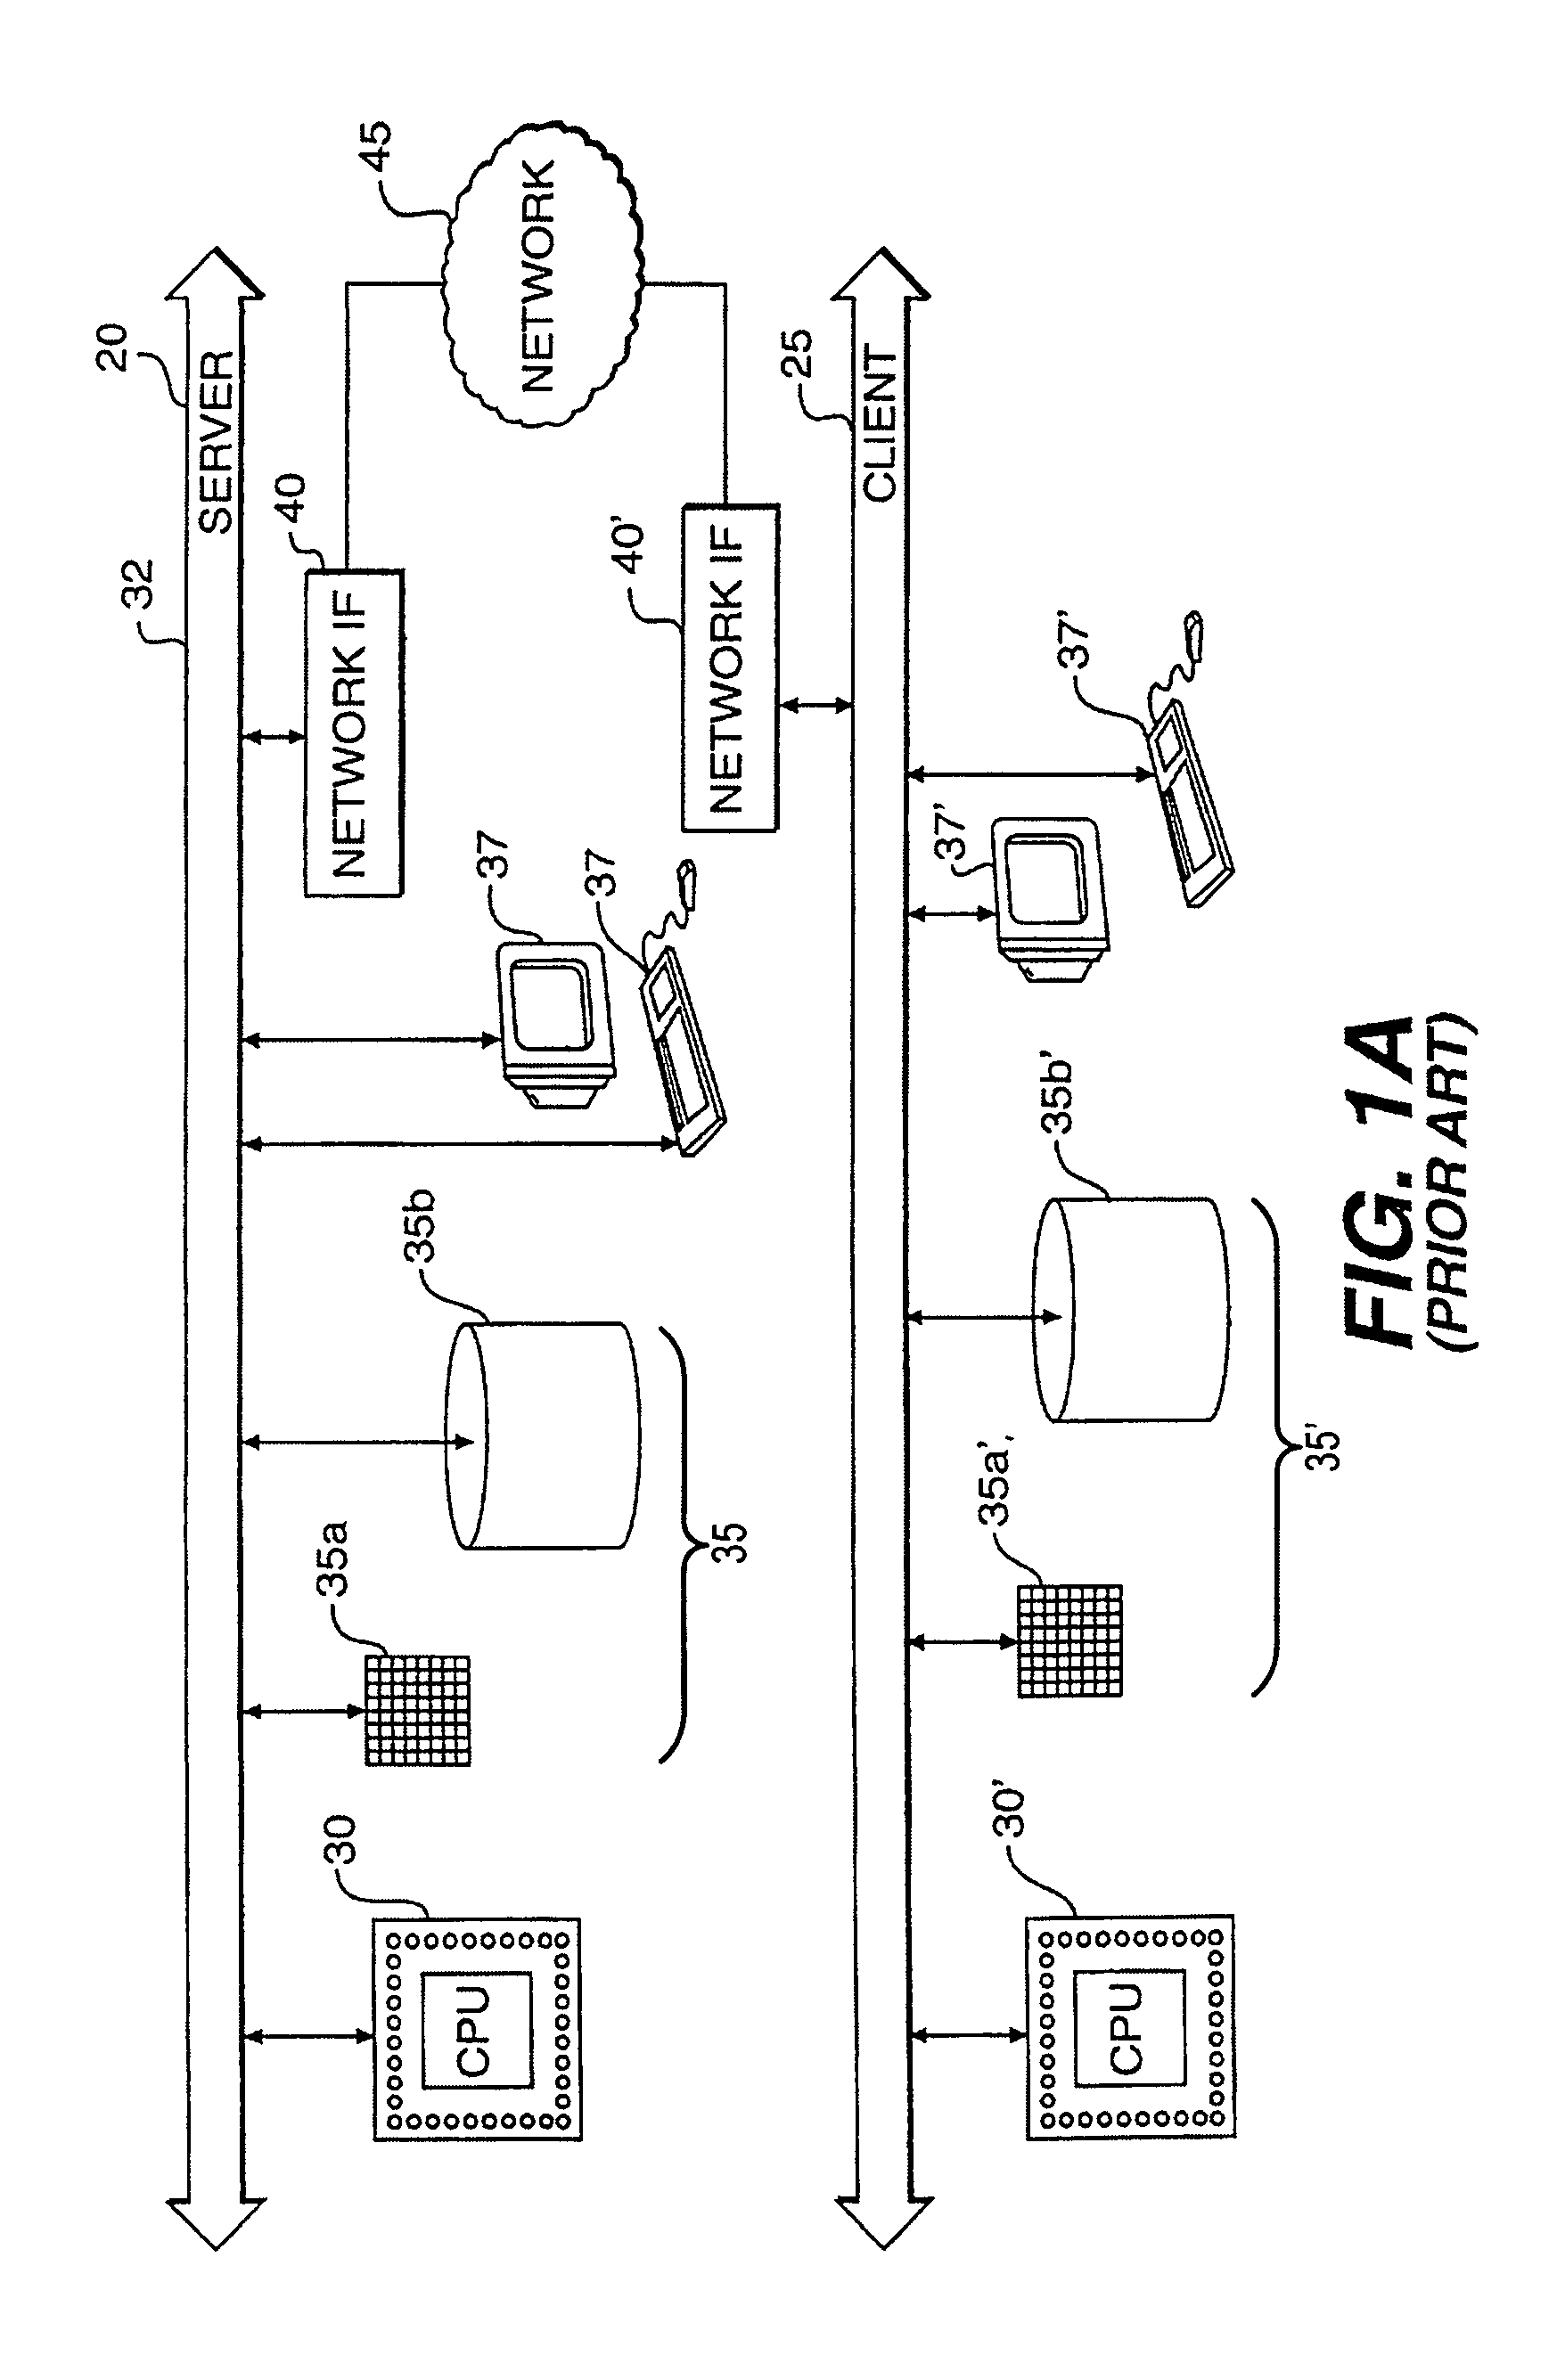 Distributed computing system and method for distributing user requests to replicated network servers